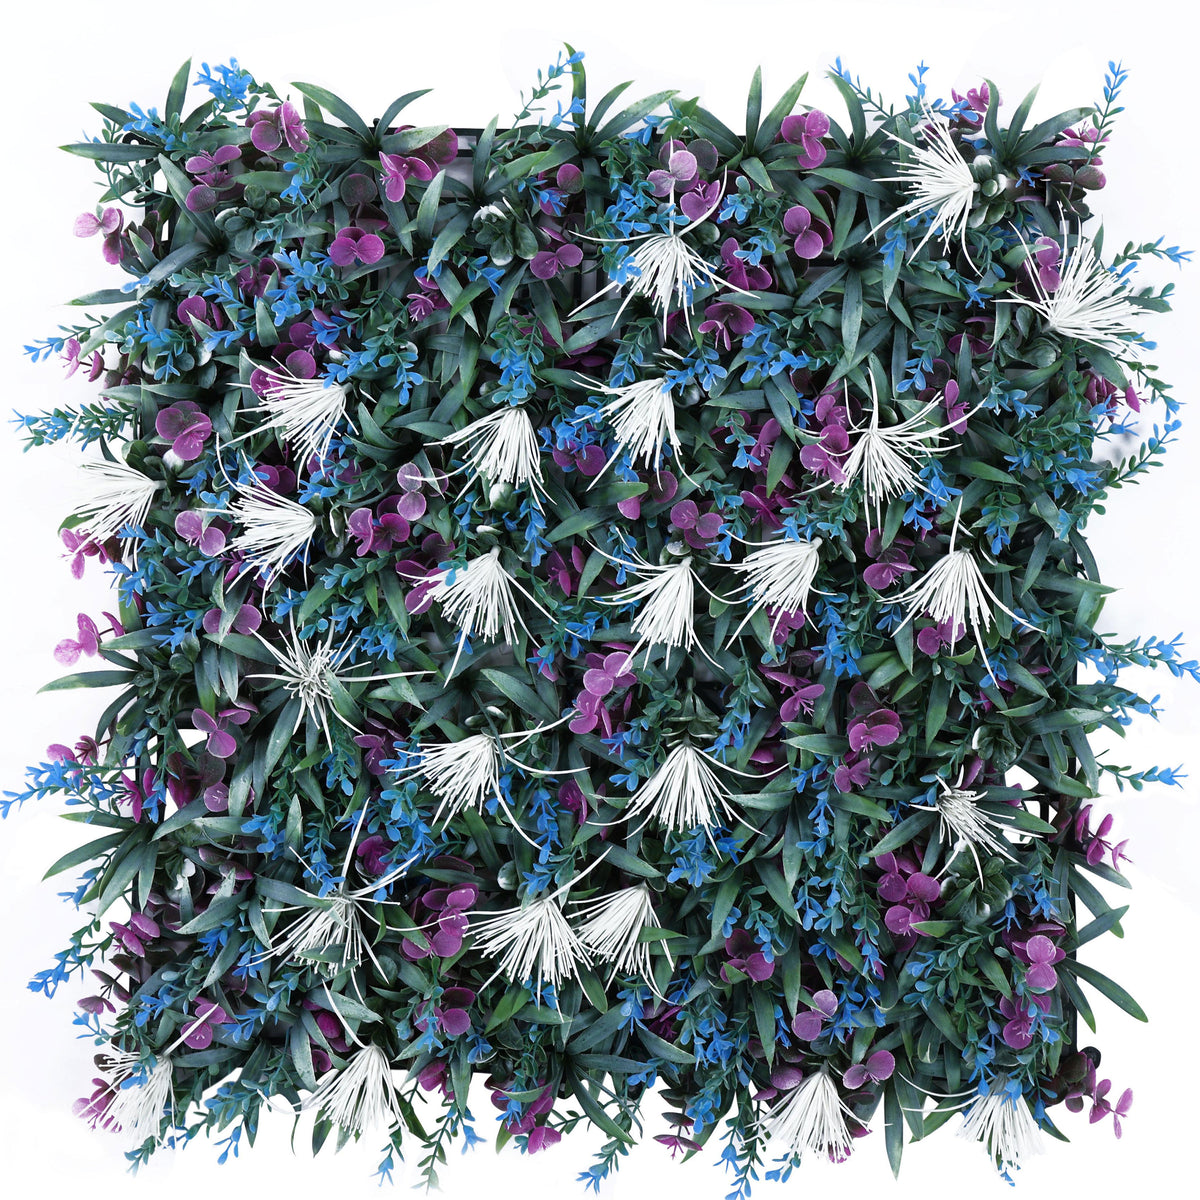 white-and-purple-flowers-with-blue-an-green-leaves-artificial-vertical-green-garden-wall-tile--MTIx